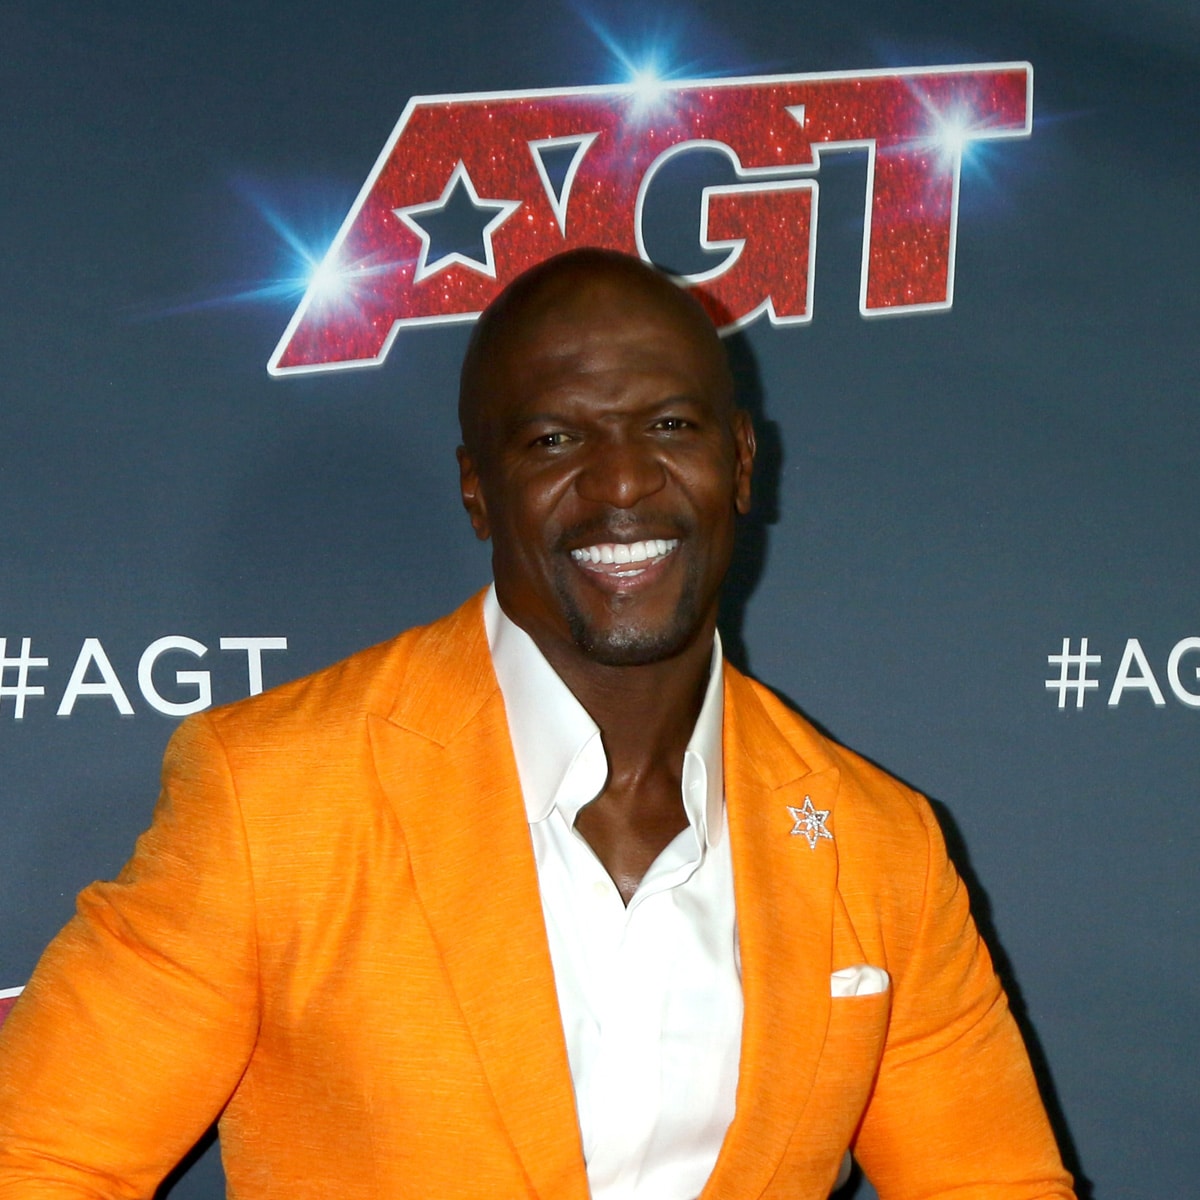 actor terry crews at the america's got talent red carpet